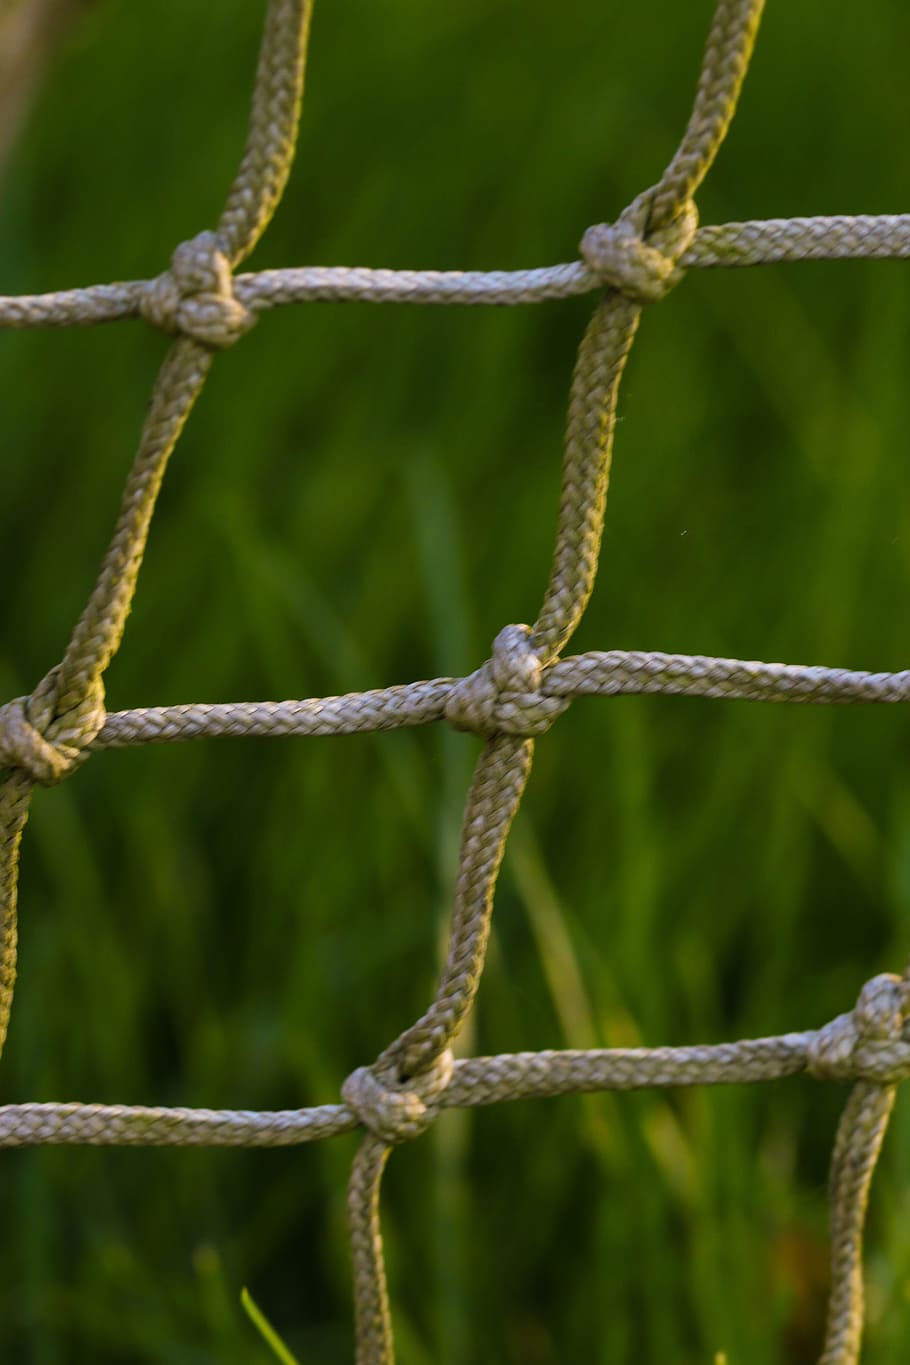 net, soccer goal, grass, sport, security, close-up, safety, protection, fence, metal